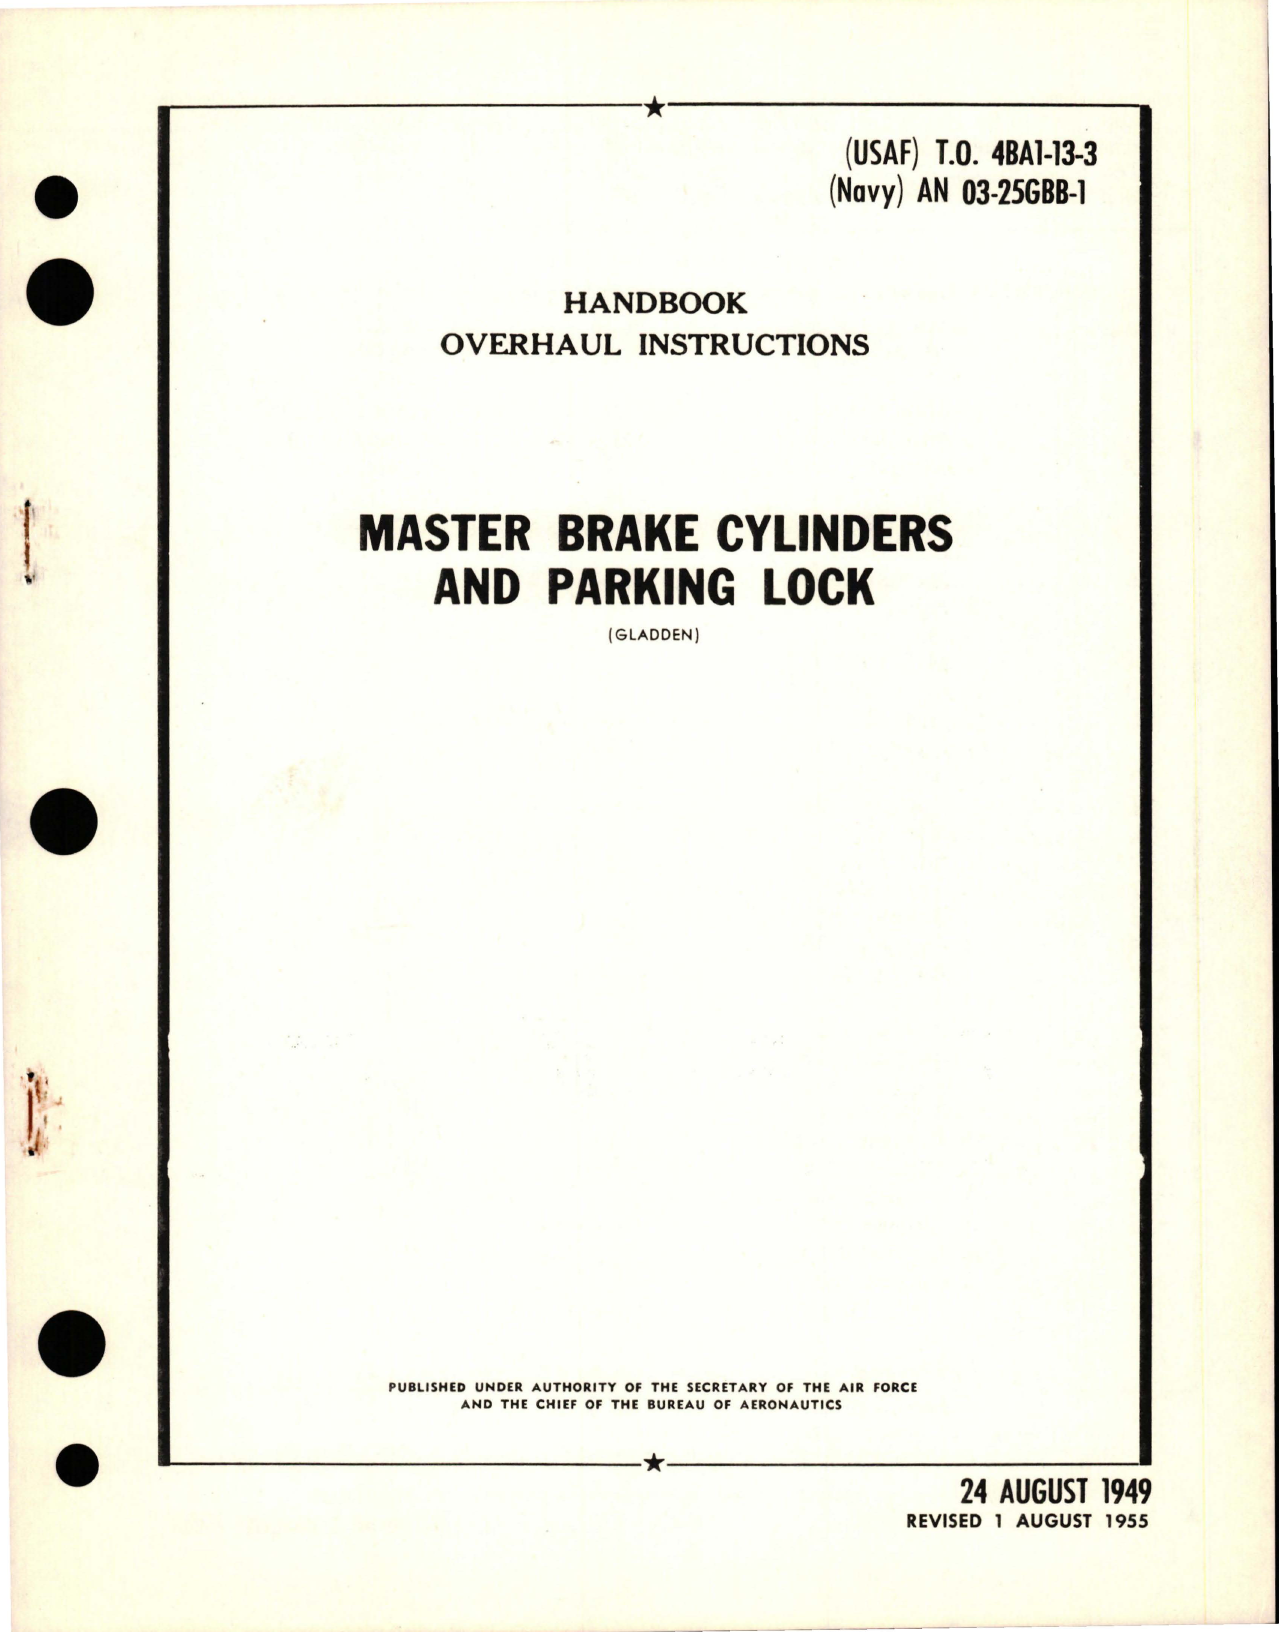 Sample page 1 from AirCorps Library document: Overhaul Instructions for Master Brake Cylinders and Parking Lock